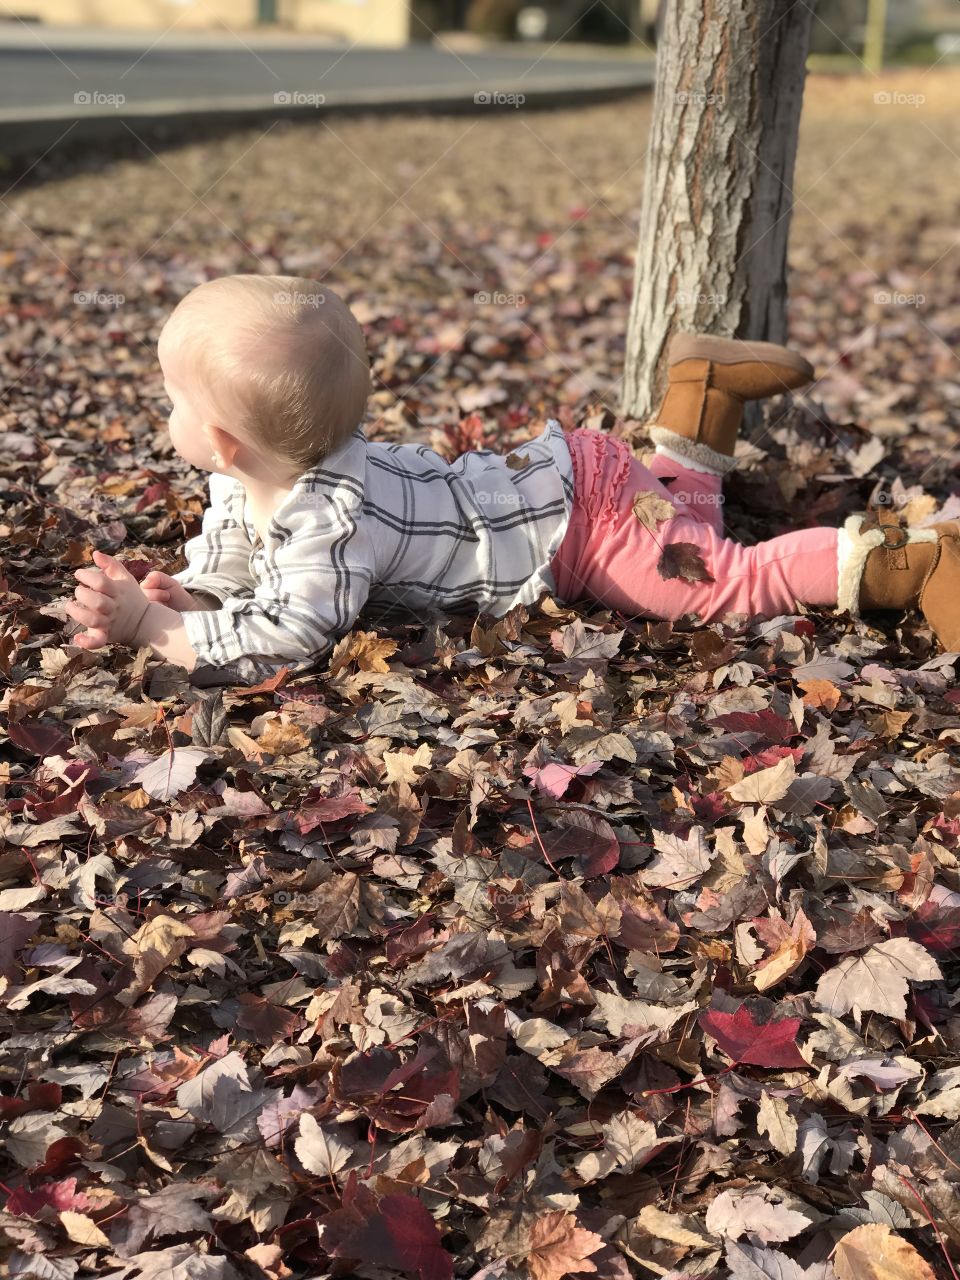 What is an eventful day without exploring some fall leaves? Playful little girl enjoying some fun. 